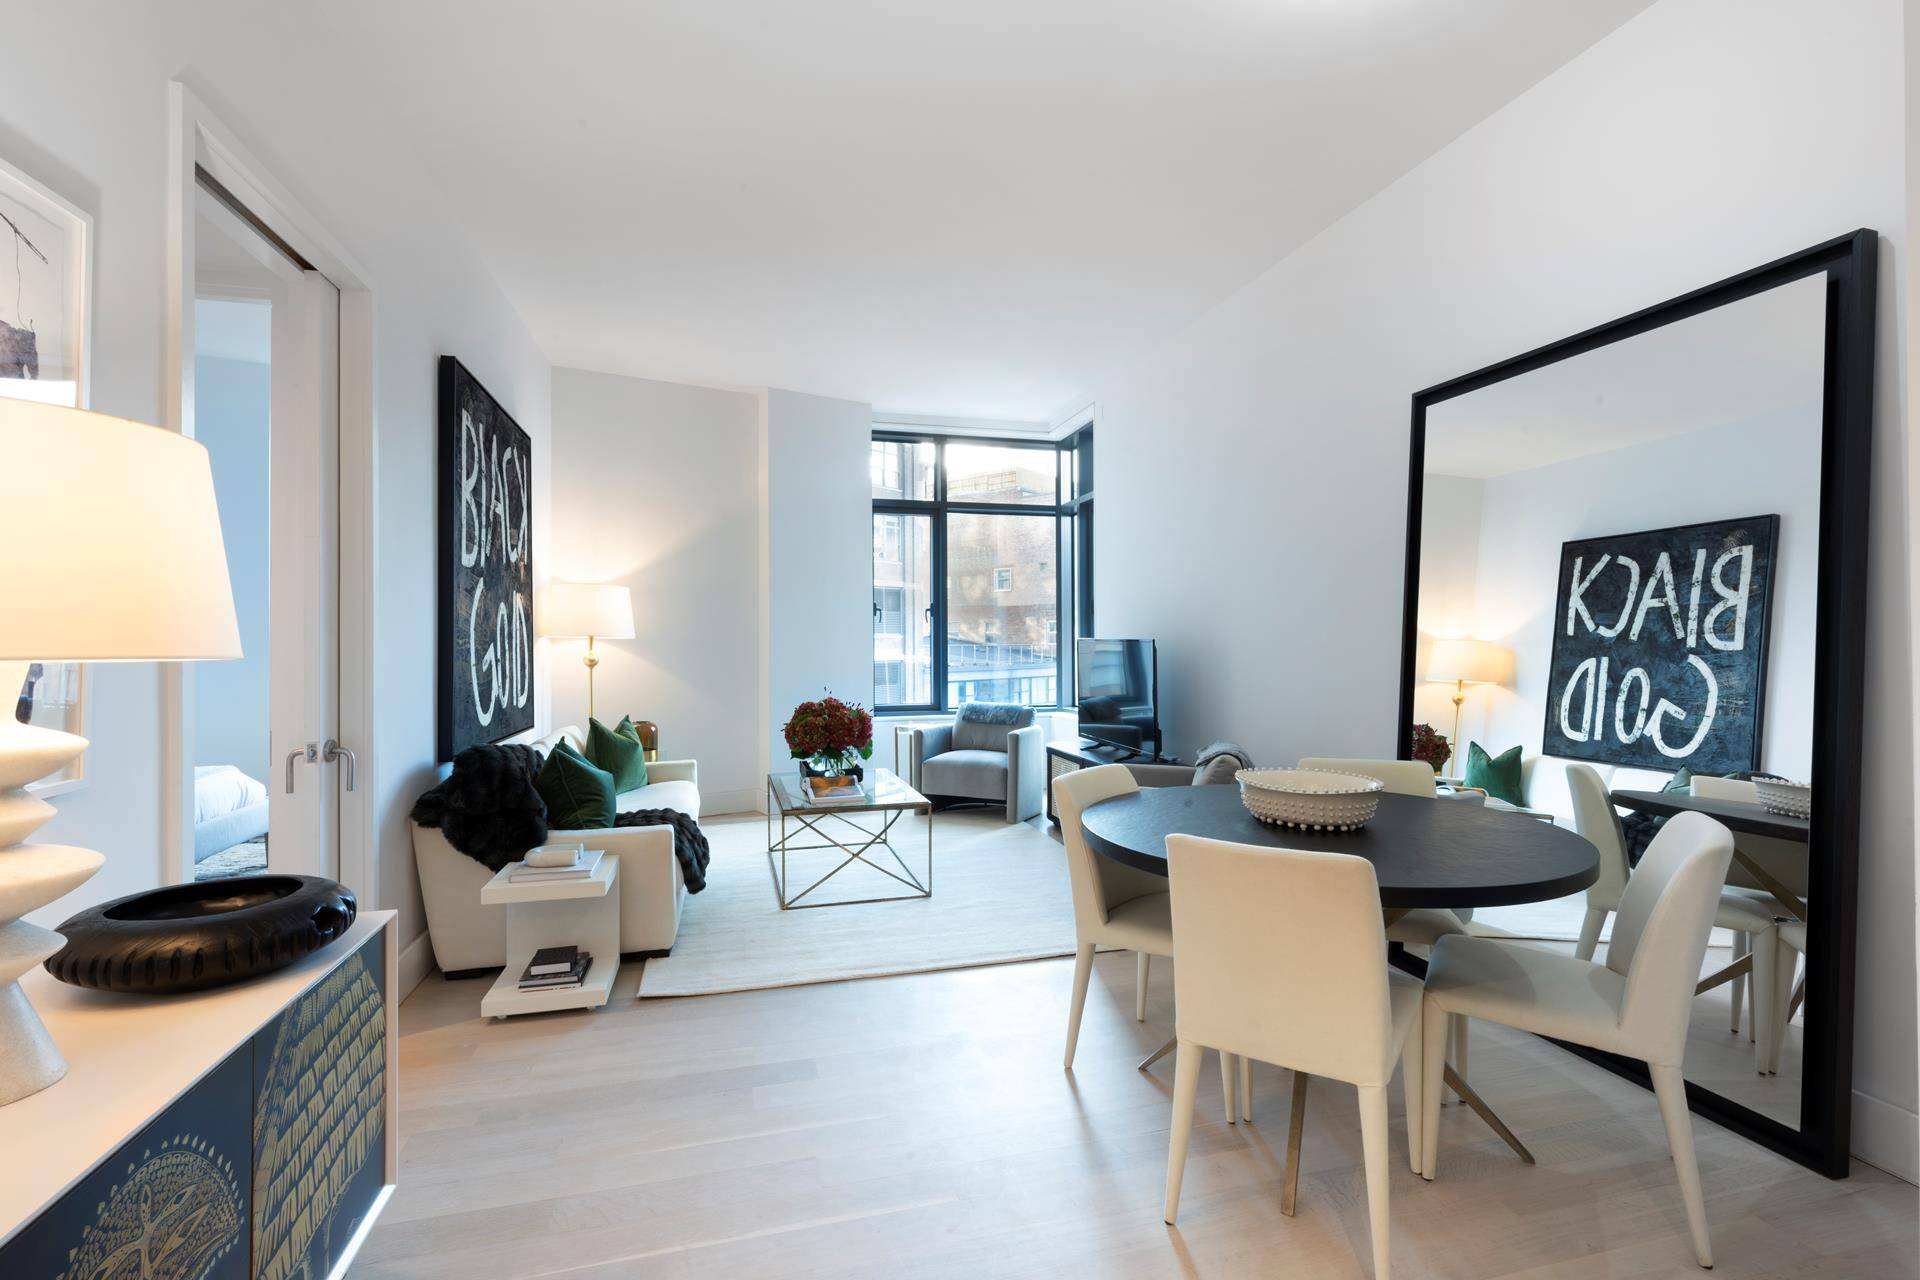 Introducing residence 3A at The Riverview, a new boutique residential condominium with architecture and interiors by award winning Rawlings Architects, located at the crossroads of TriBeCa, the West Village, and ...